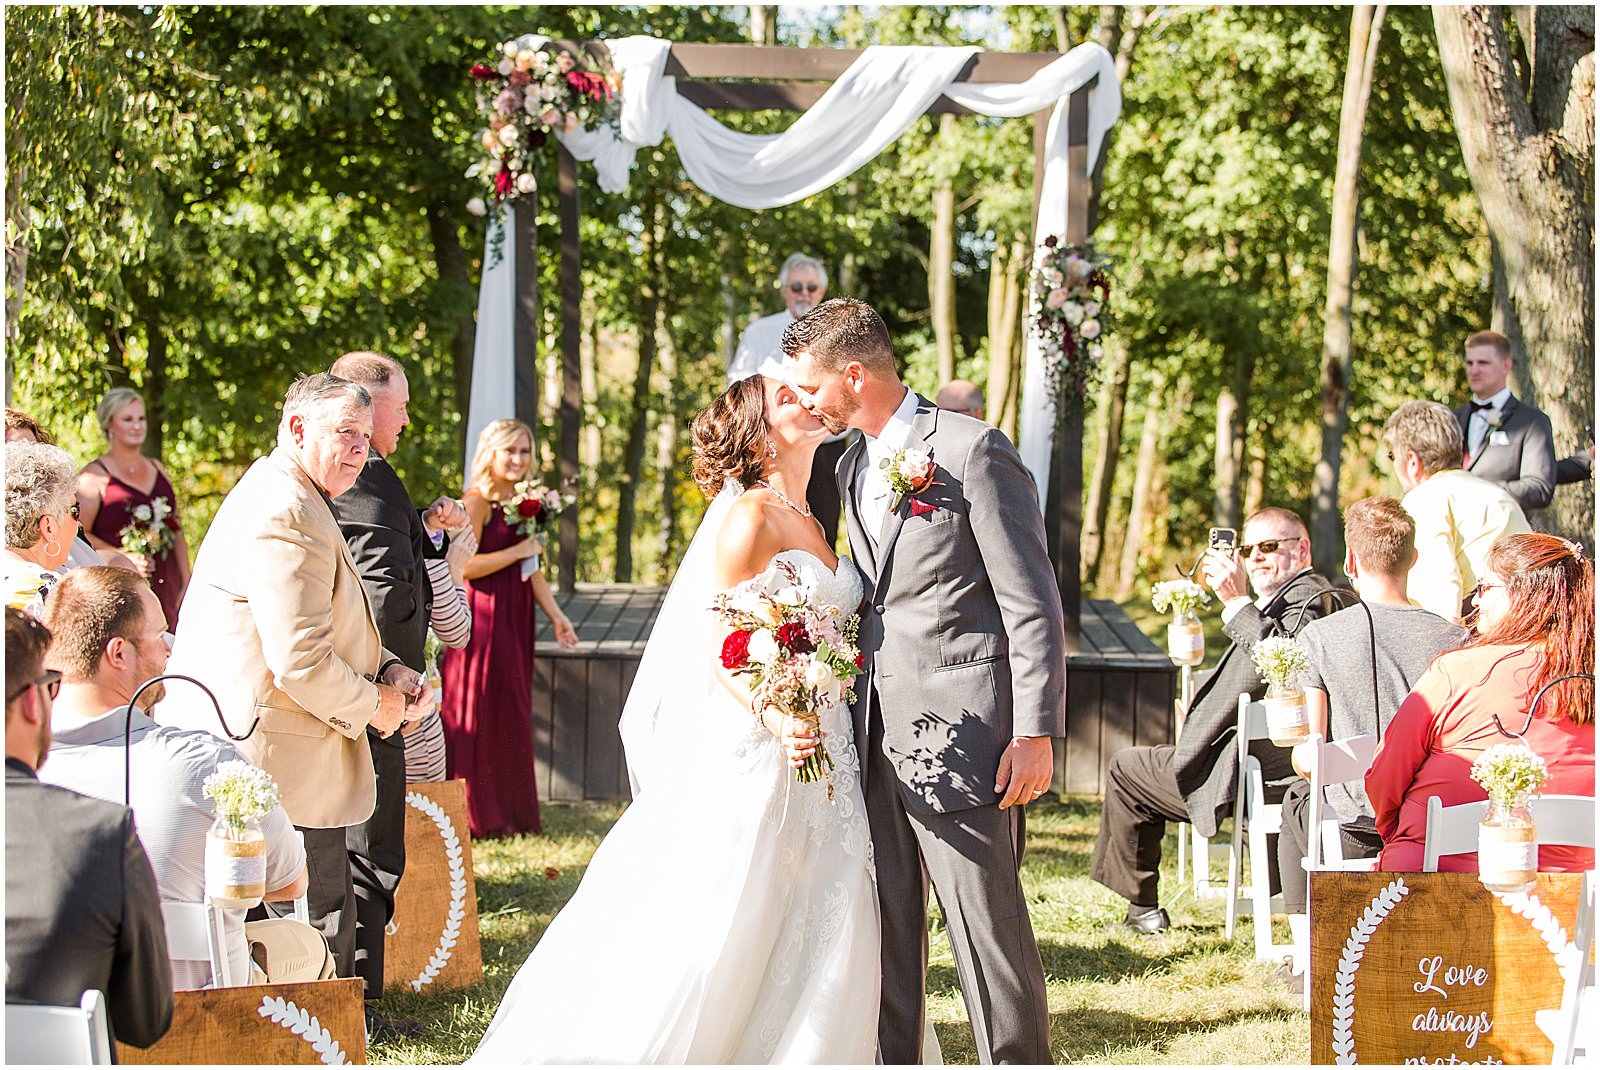 A Stunning Fall Wedding in Indianapolis, IN |. Sally and Andrew | Bret and Brandie Photography 0110.jpg